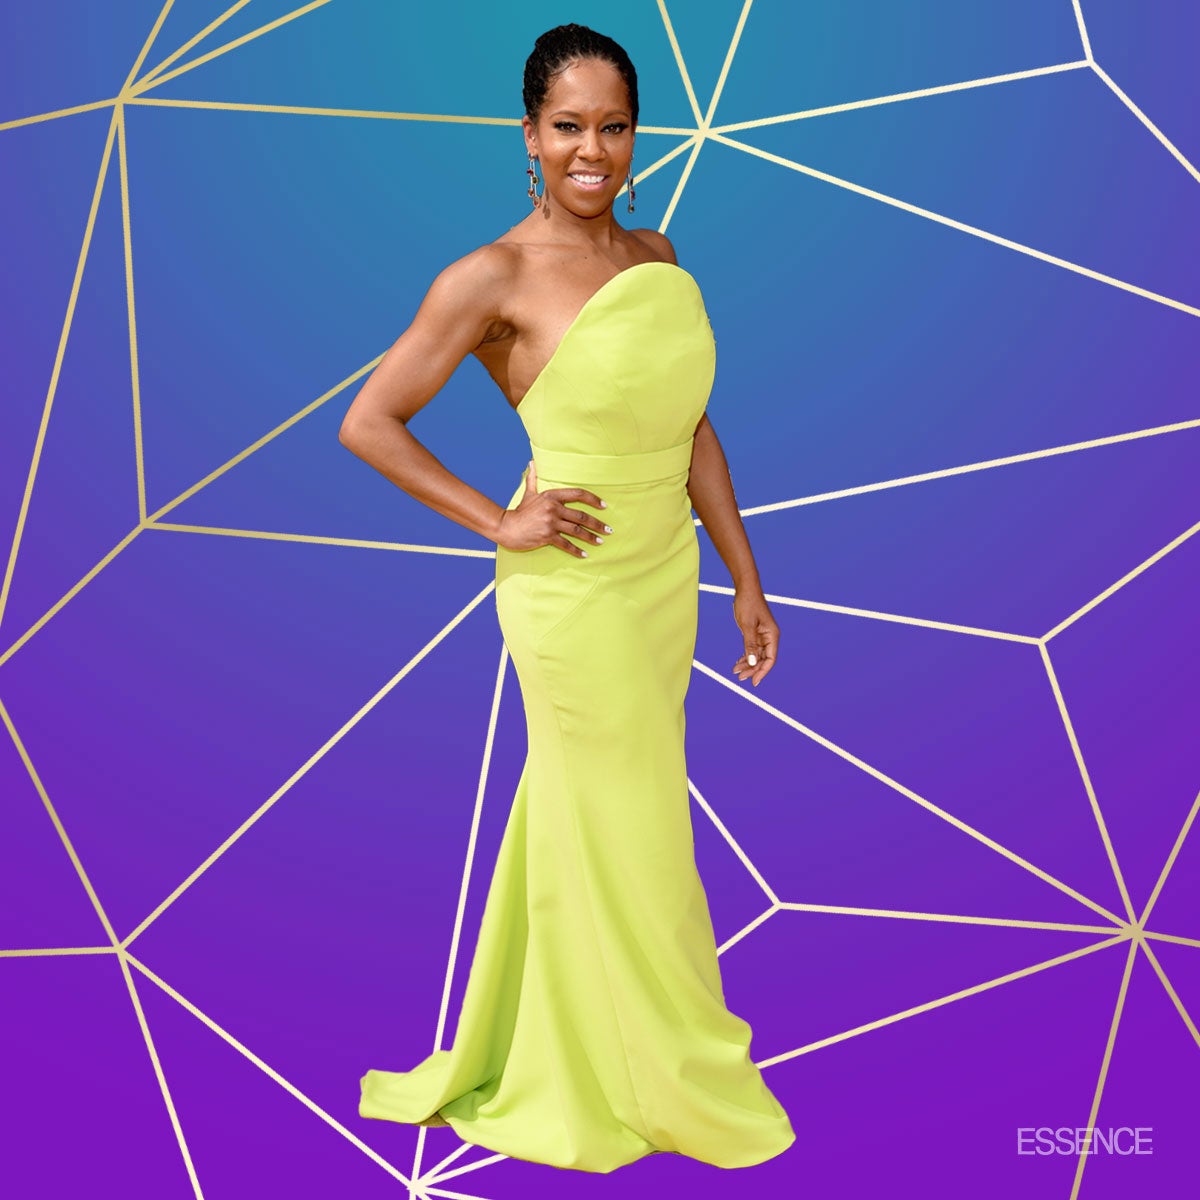 Regina King Says 'Wow, Wow, Wow' After Hearing She's Oscar-Nominated